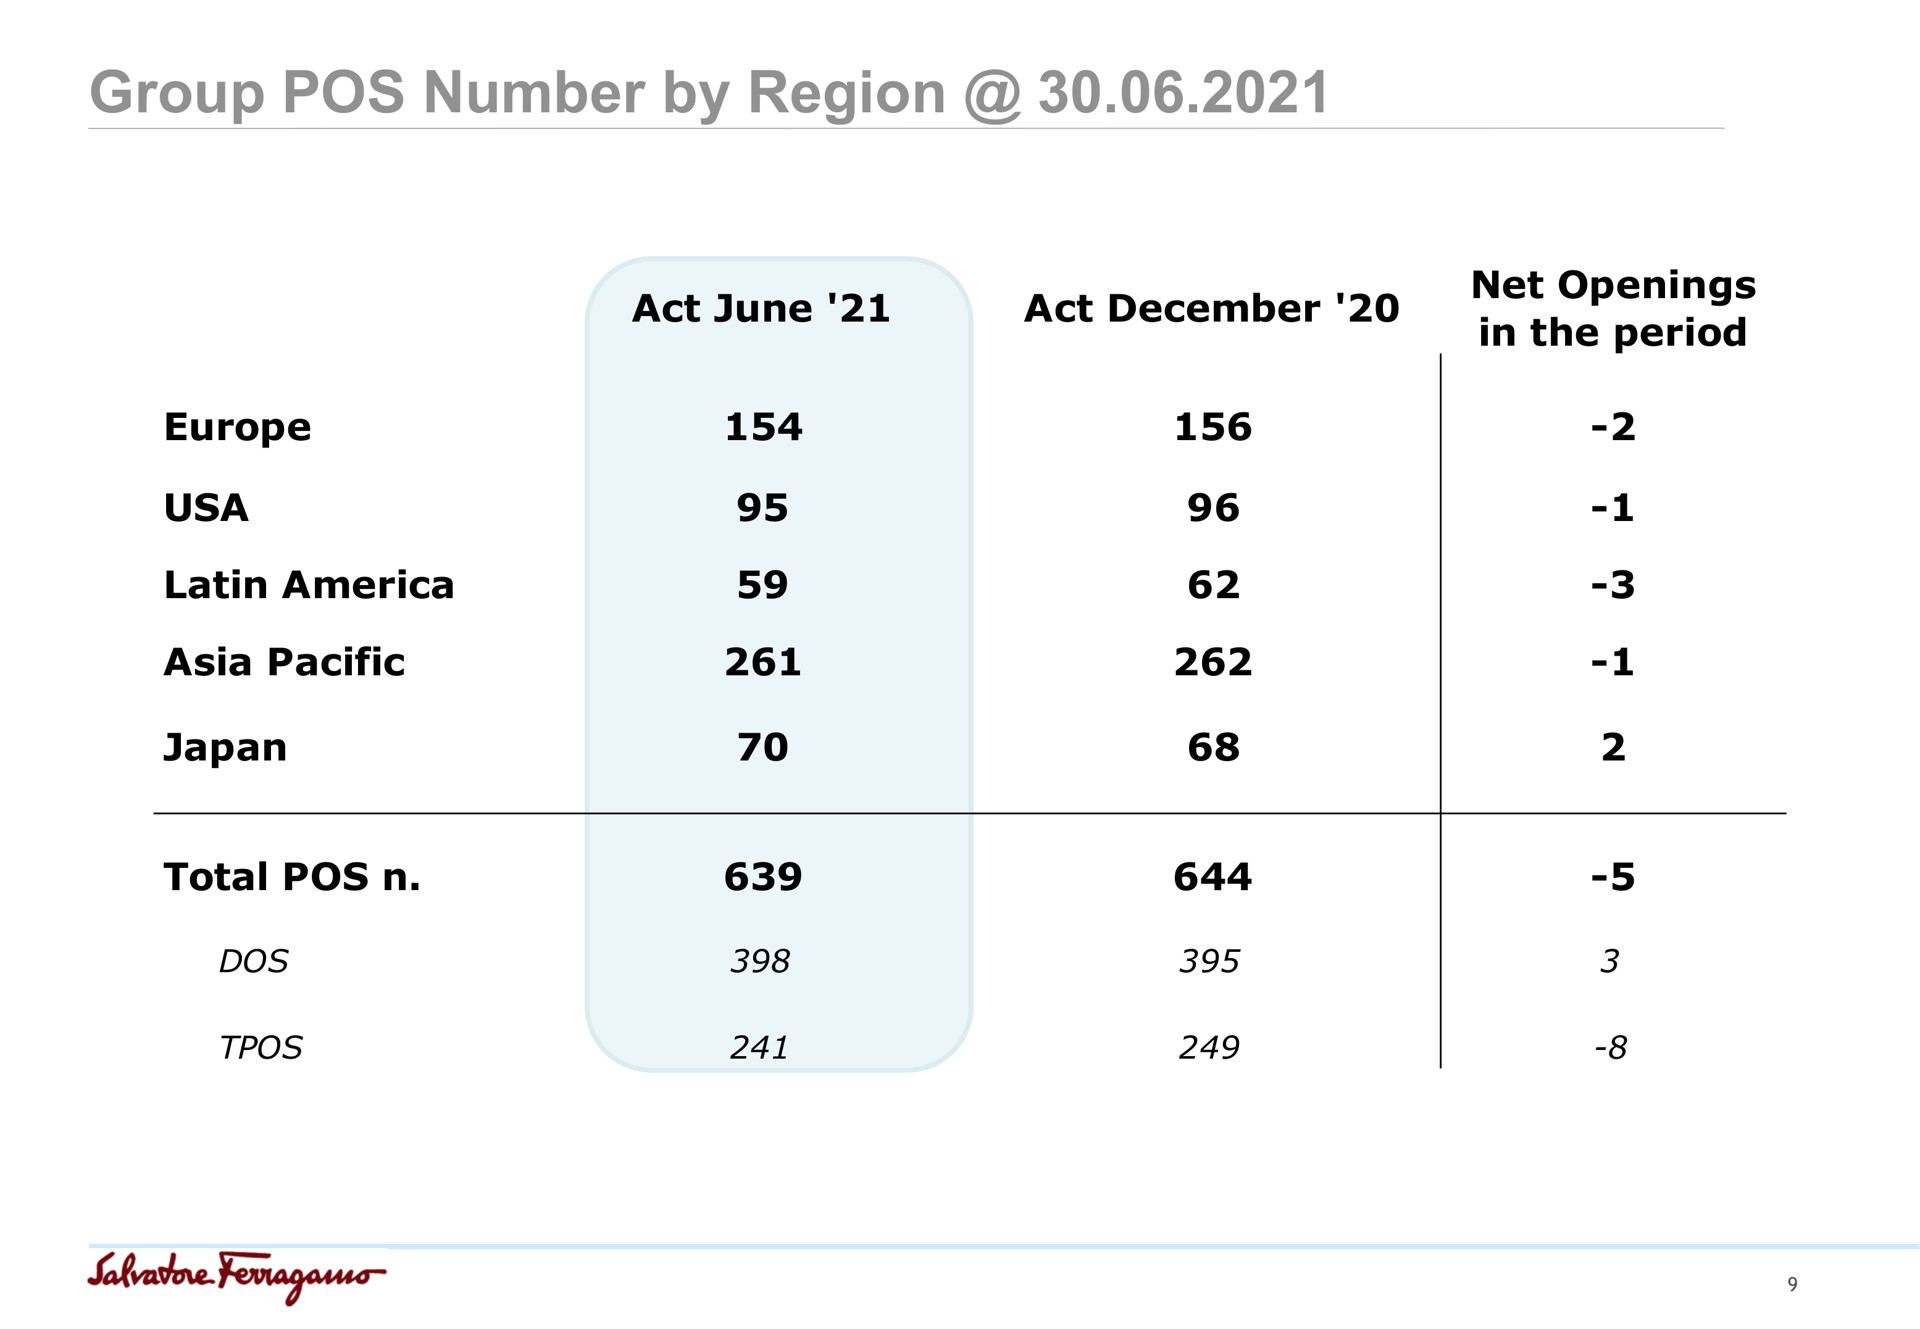 group pos number by region net openings in the period | Salvatore Ferragamo